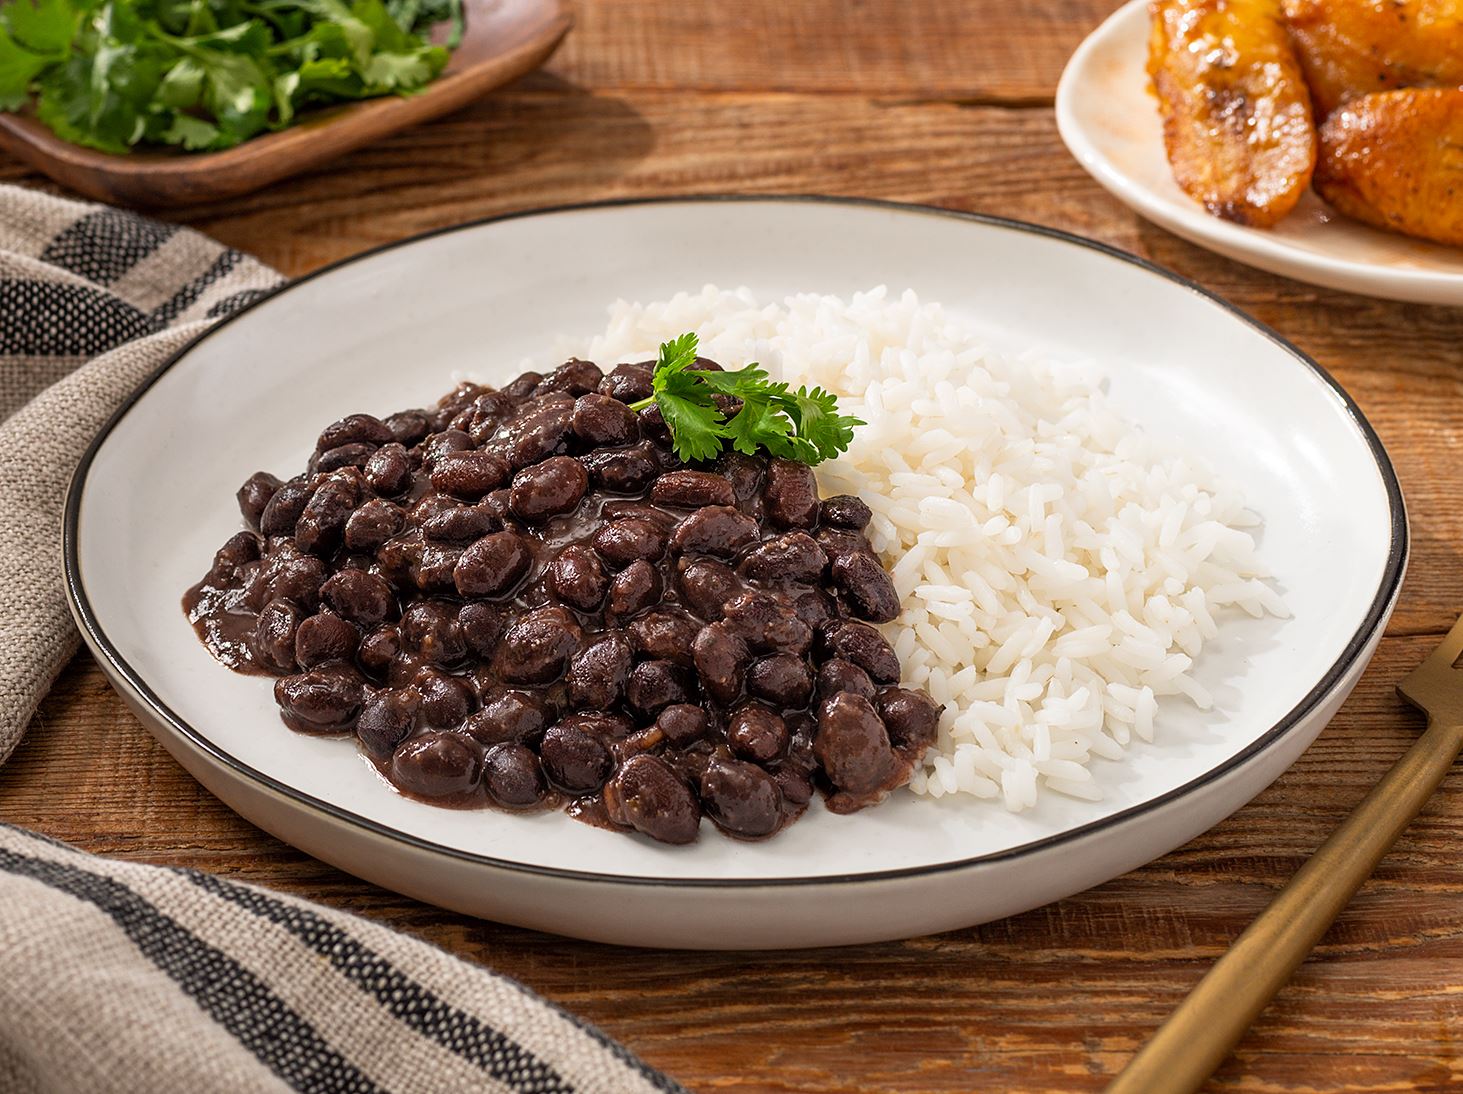 MyPlate Rice with Black Beans